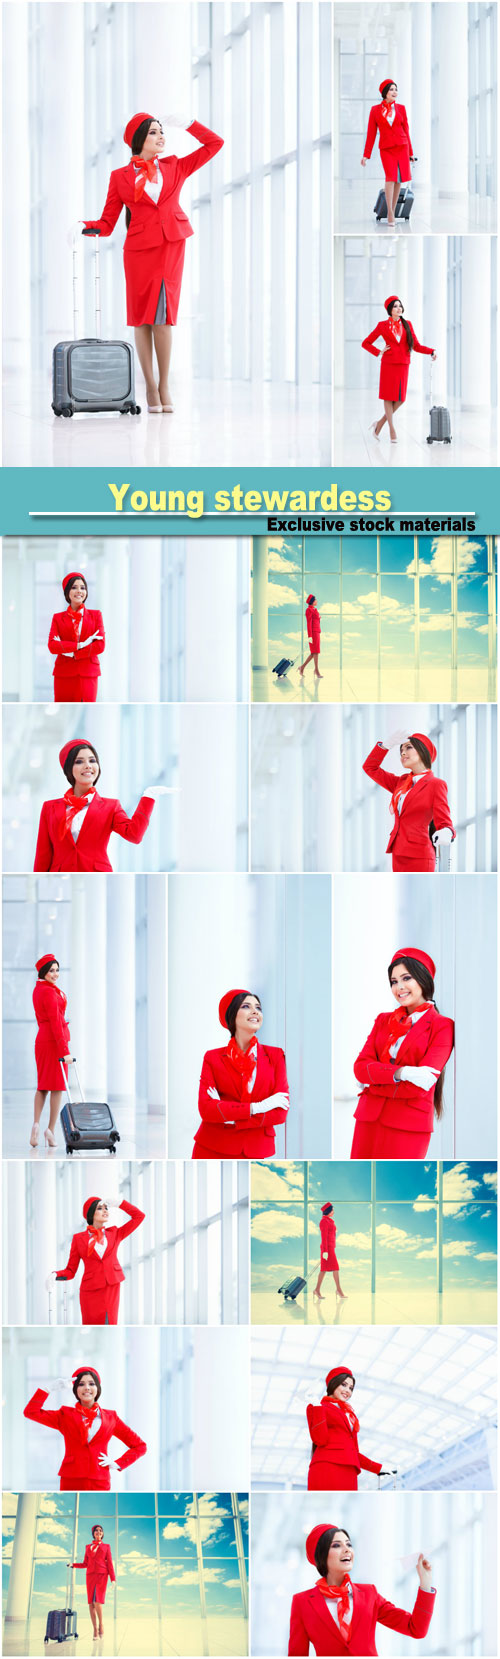 Young stewardess with a suitcase at airport